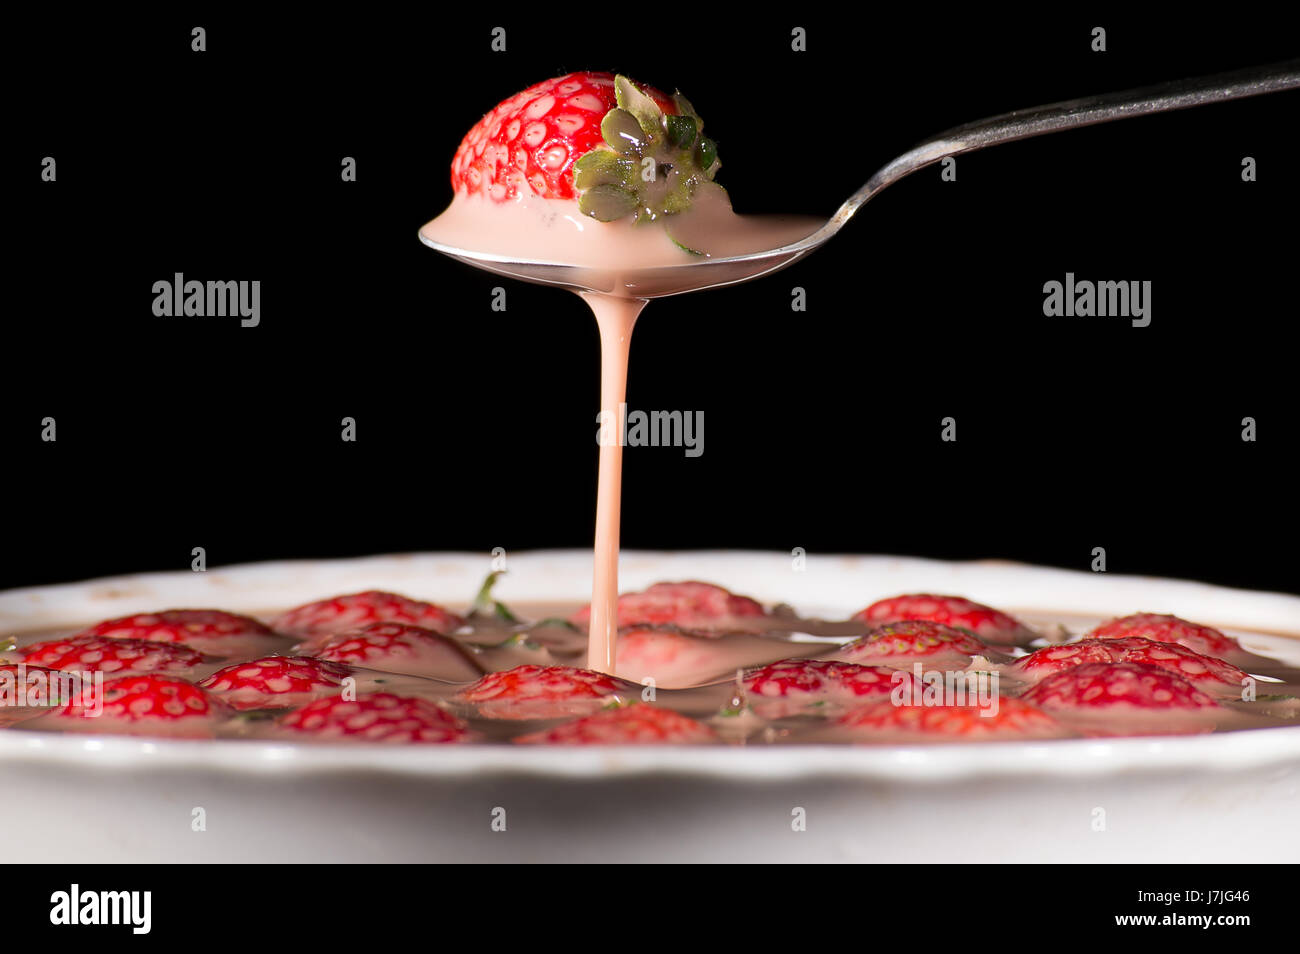 taking strawberries with spoon on black background Stock Photo